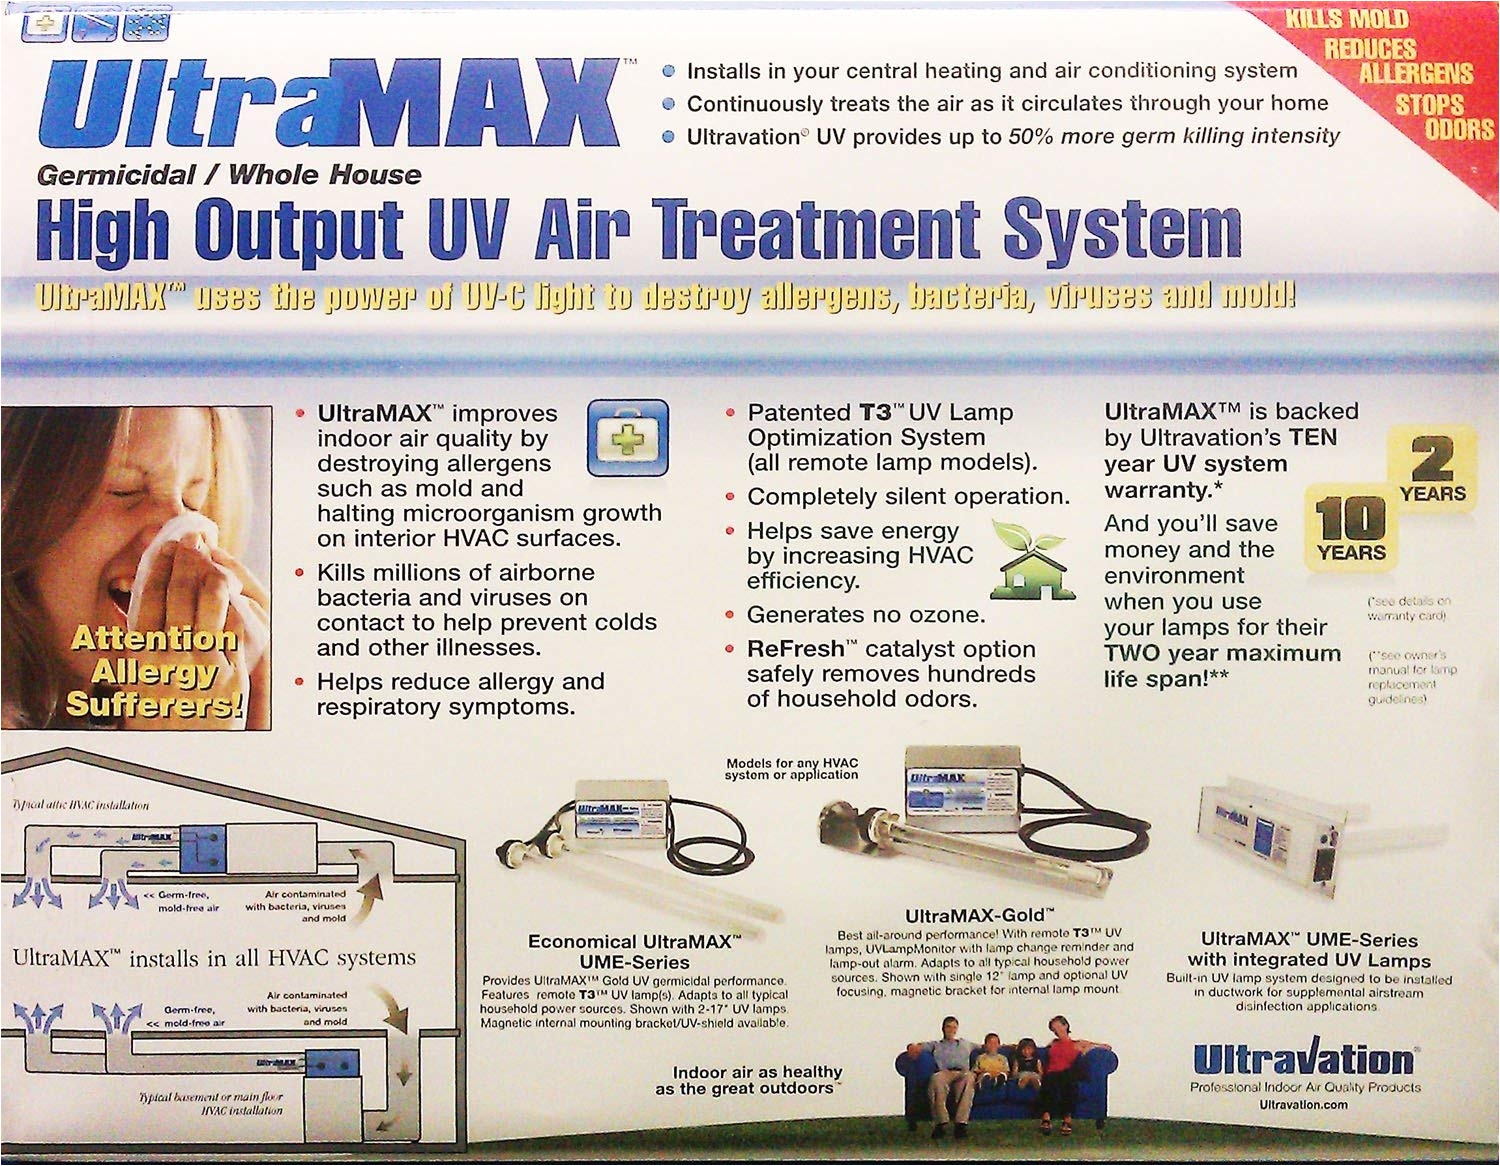 ultravation ultramax ume 1224t uv light new other products amazon com industrial scientific